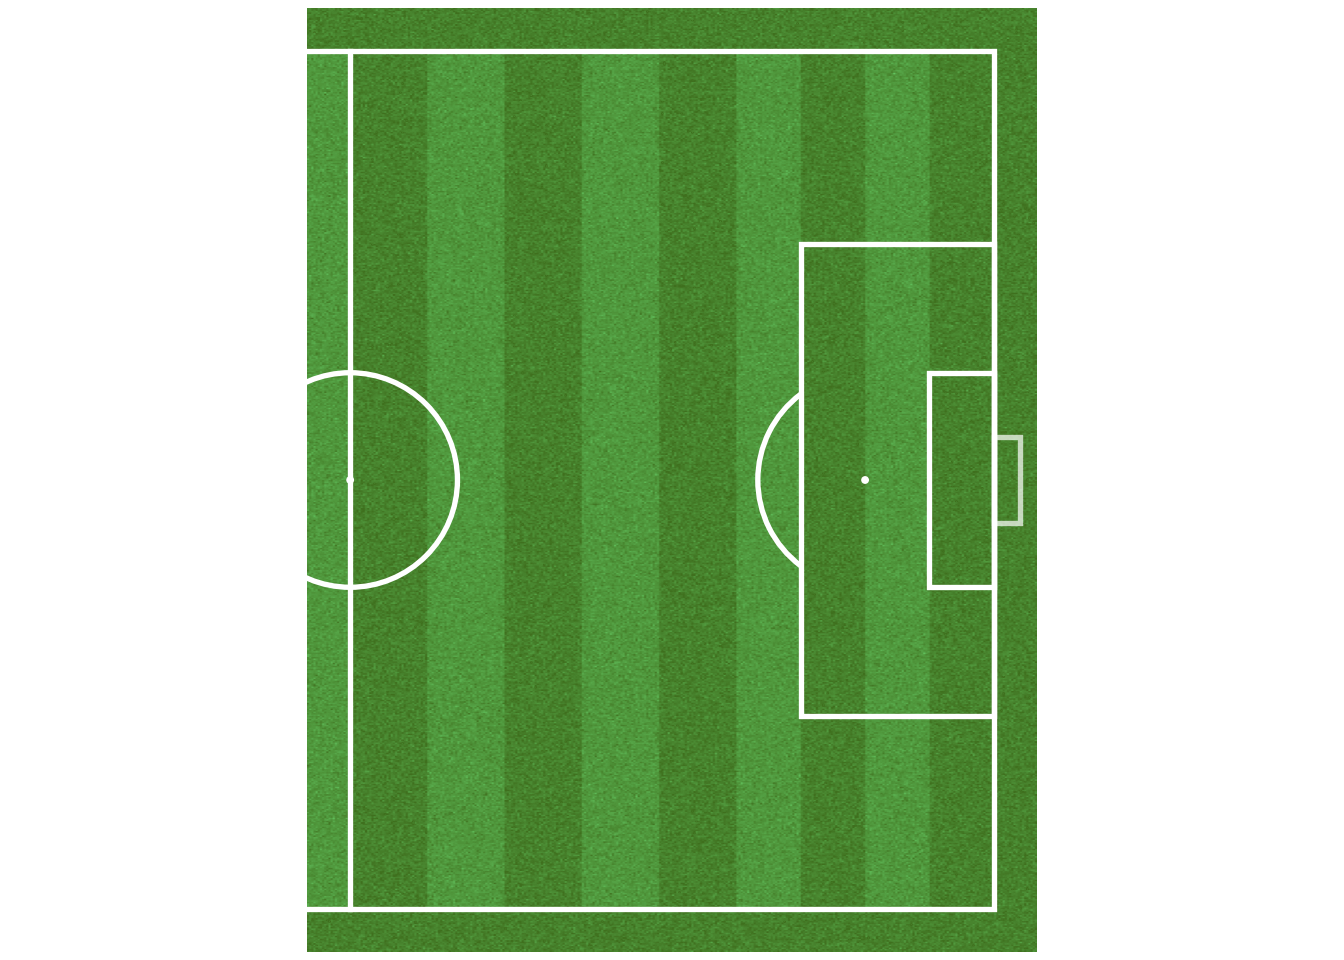 Draw a football pitch Introductory Football Data Analysis